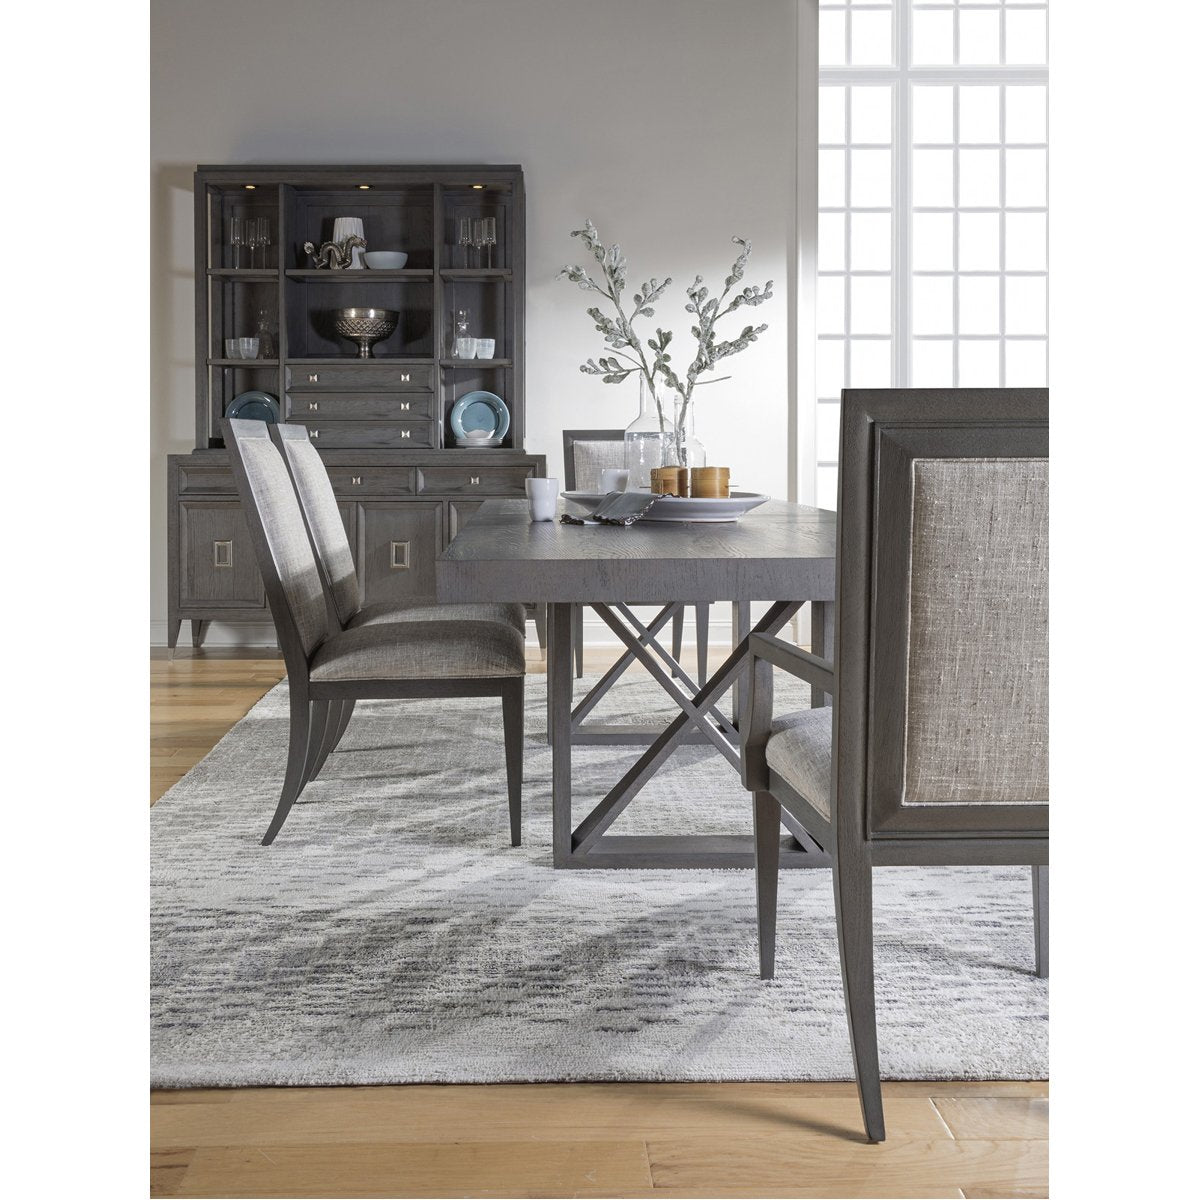 Artistica Home Appellation Rectangular Dining Table 2200-877